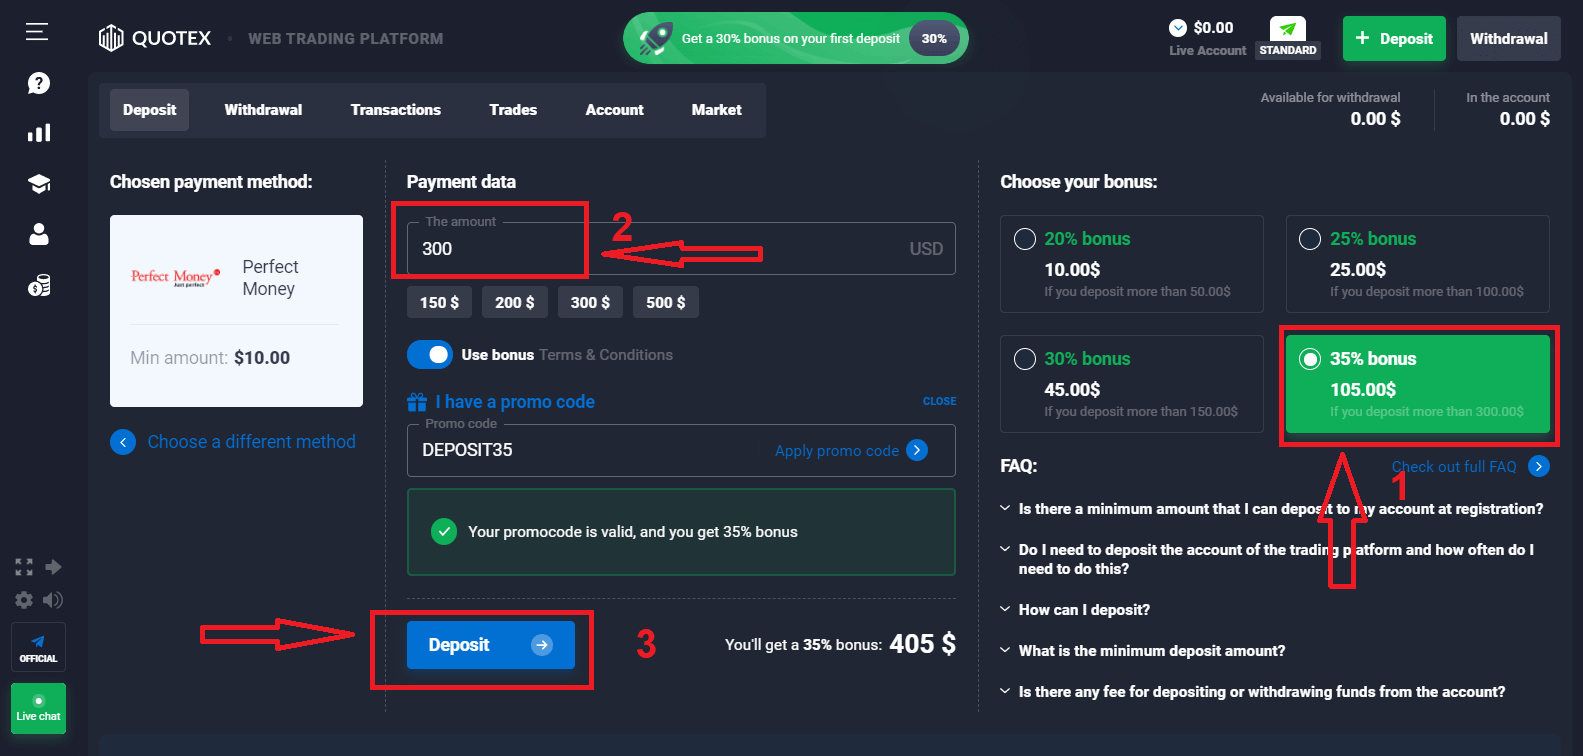 How to Deposit and Trade Digital Options at Quotex